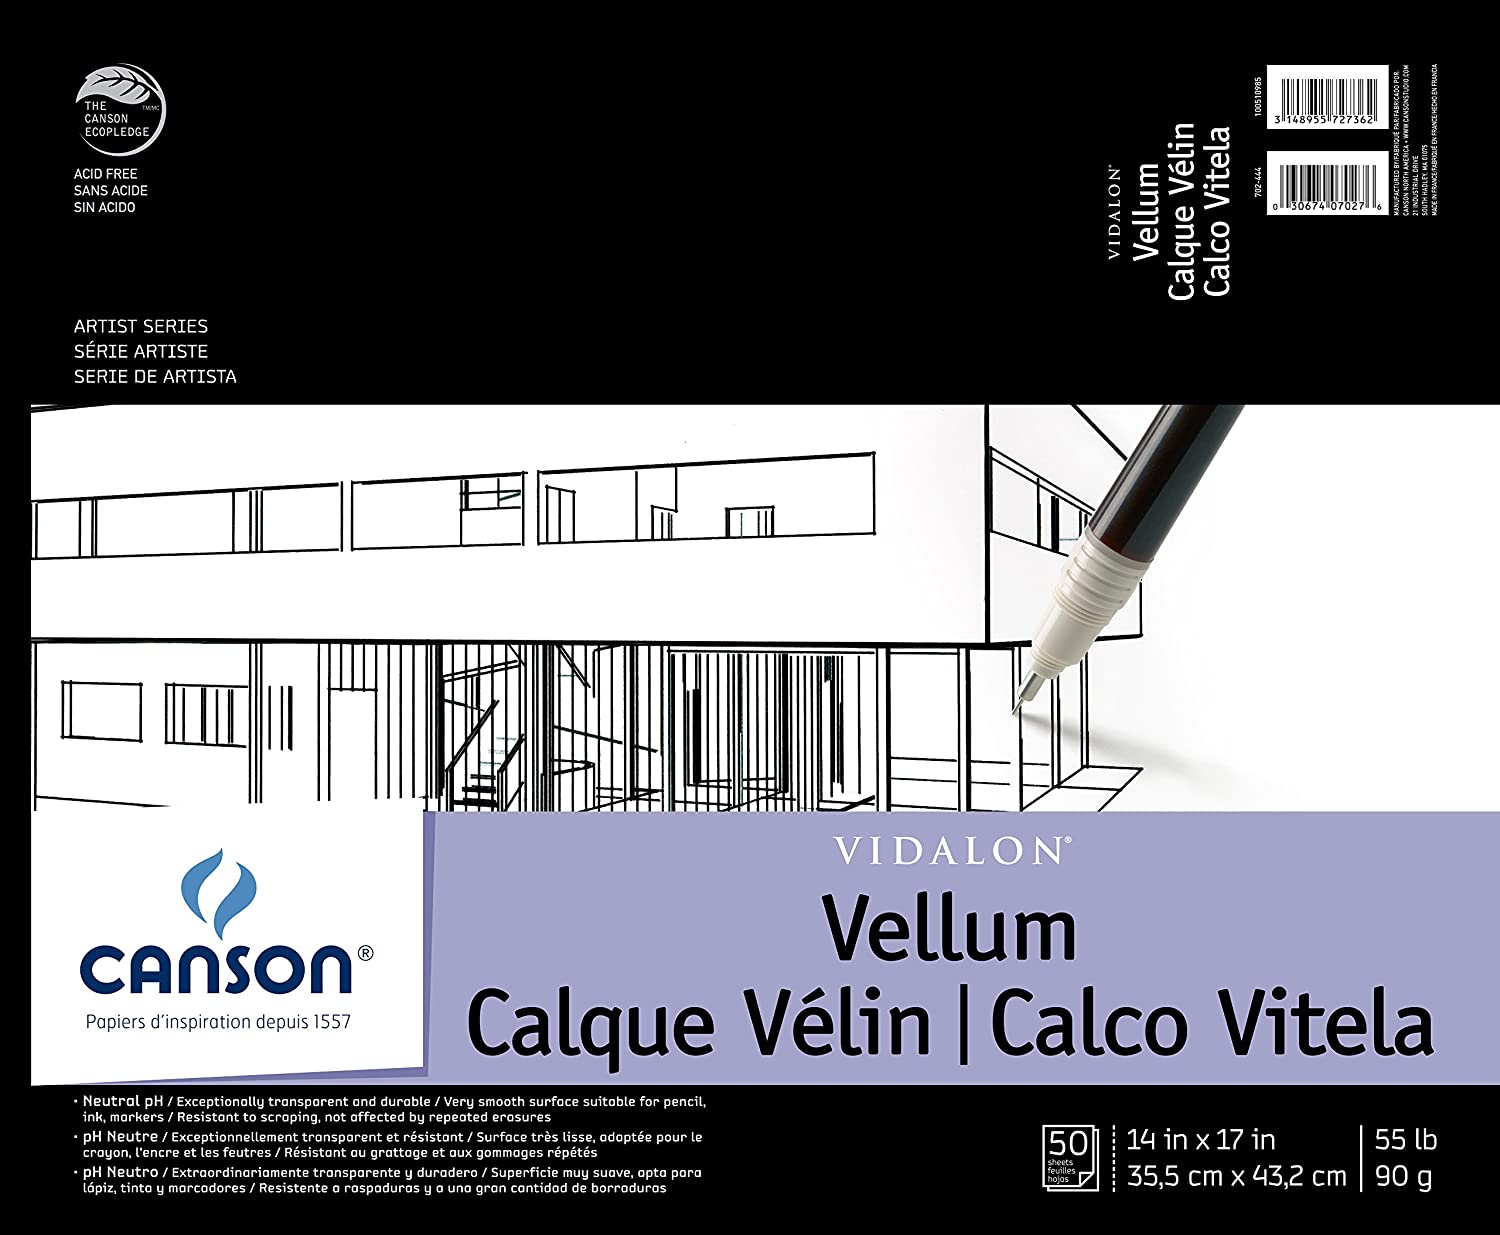 Canson Artist Series Vidalon Vellum Paper Pad, Translucent and Acid Free for Pencil, Ink and Markers, Fold Over, 55 Pound, 14 x 17 Inch, 50 Sheets